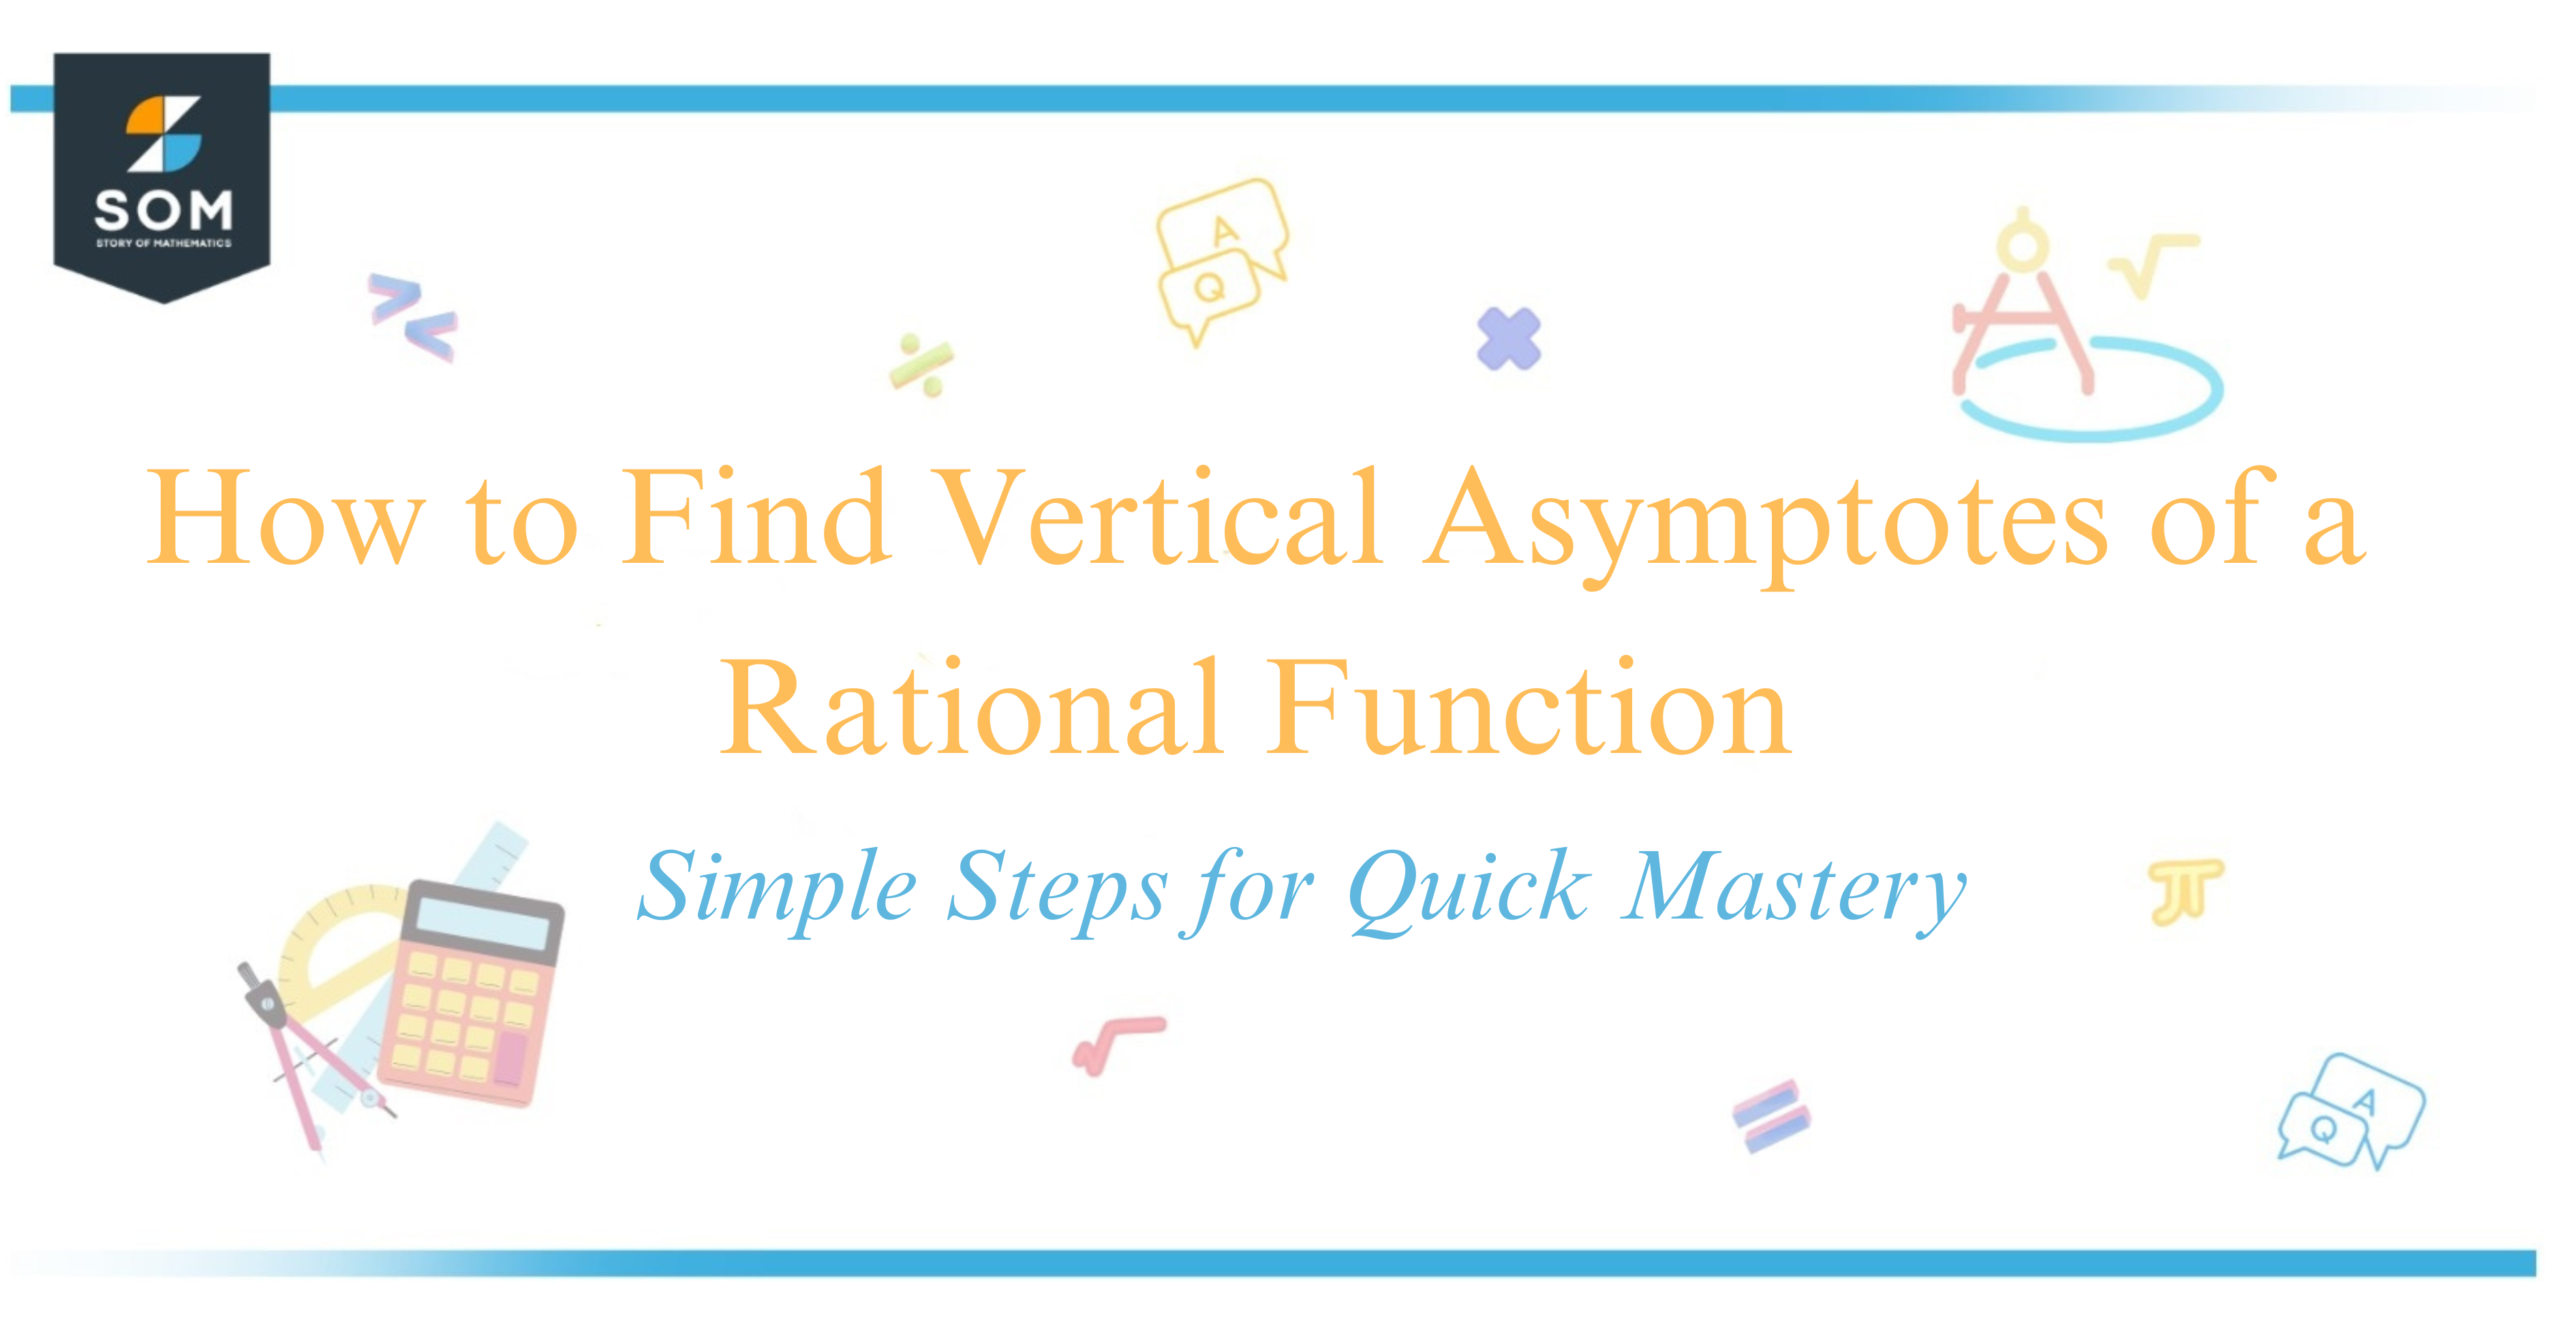 How to Find Vertical Asymptotes of a Rational Function Simple Steps for Quick Mastery